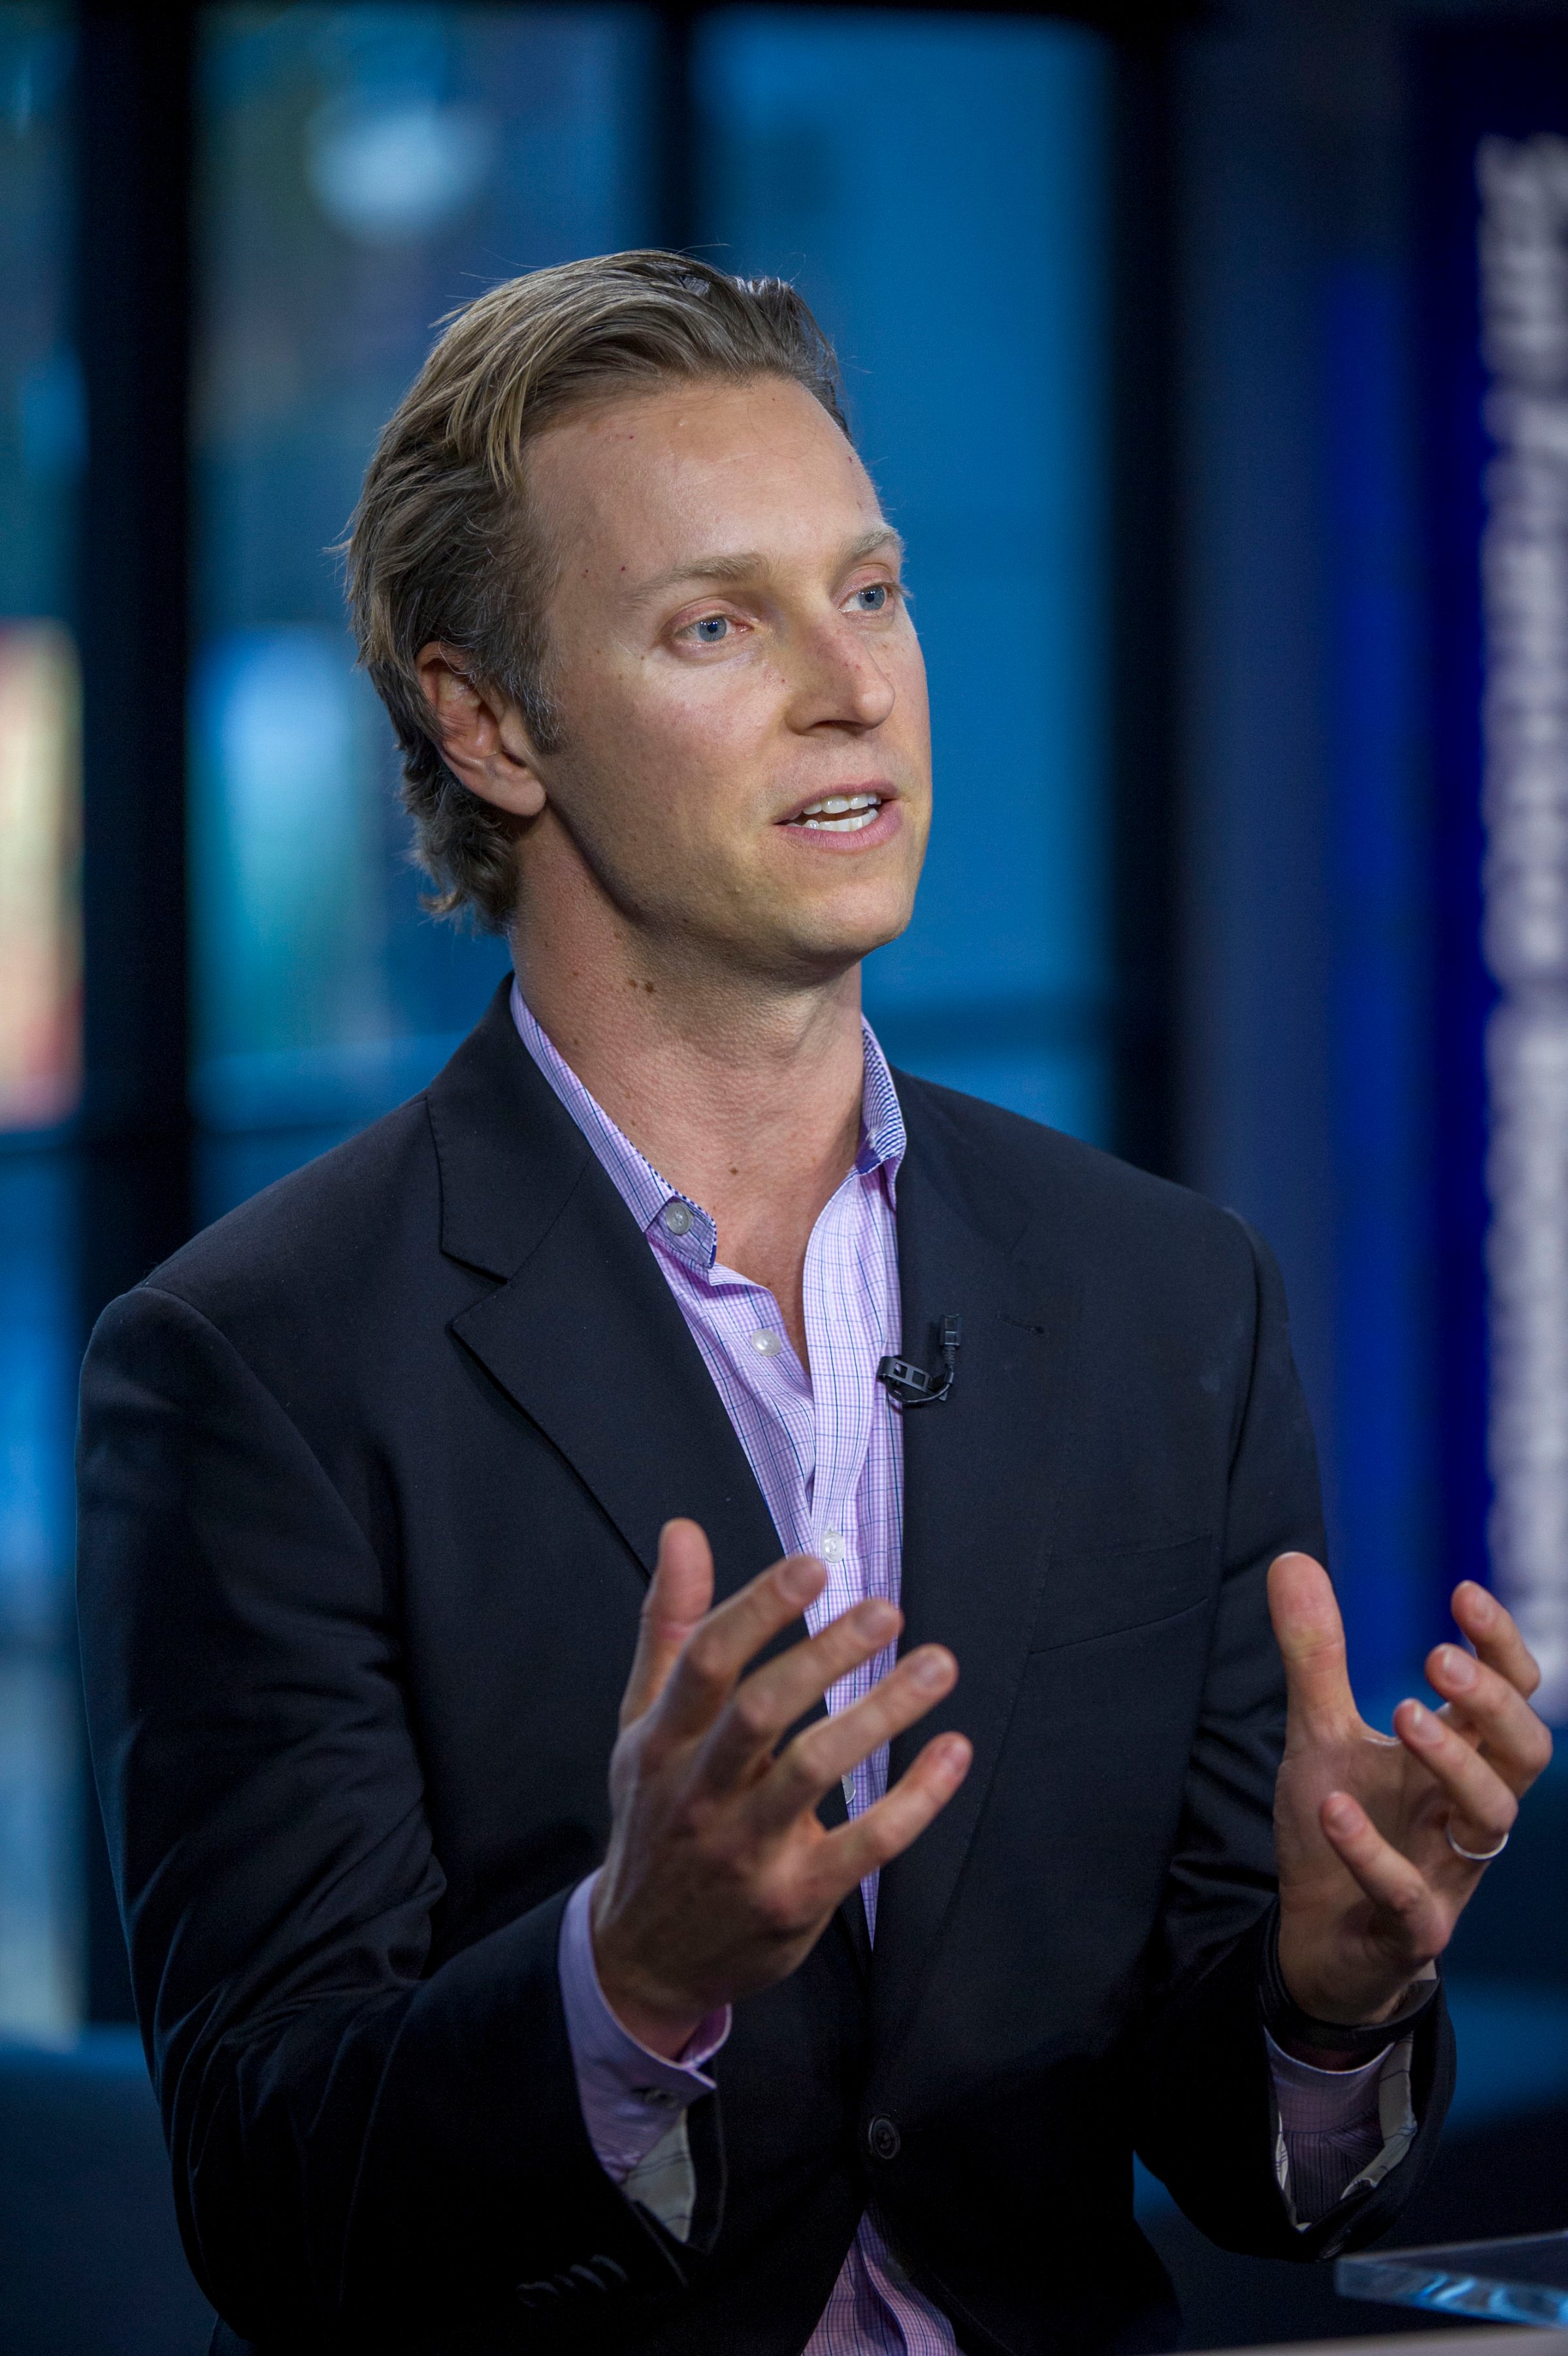 Sam Shank, chief executive officer and co-founder of HotelTonight Inc., speaks during a Bloomberg West Television interview in San Francisco, California on Jan. 2, 2014.